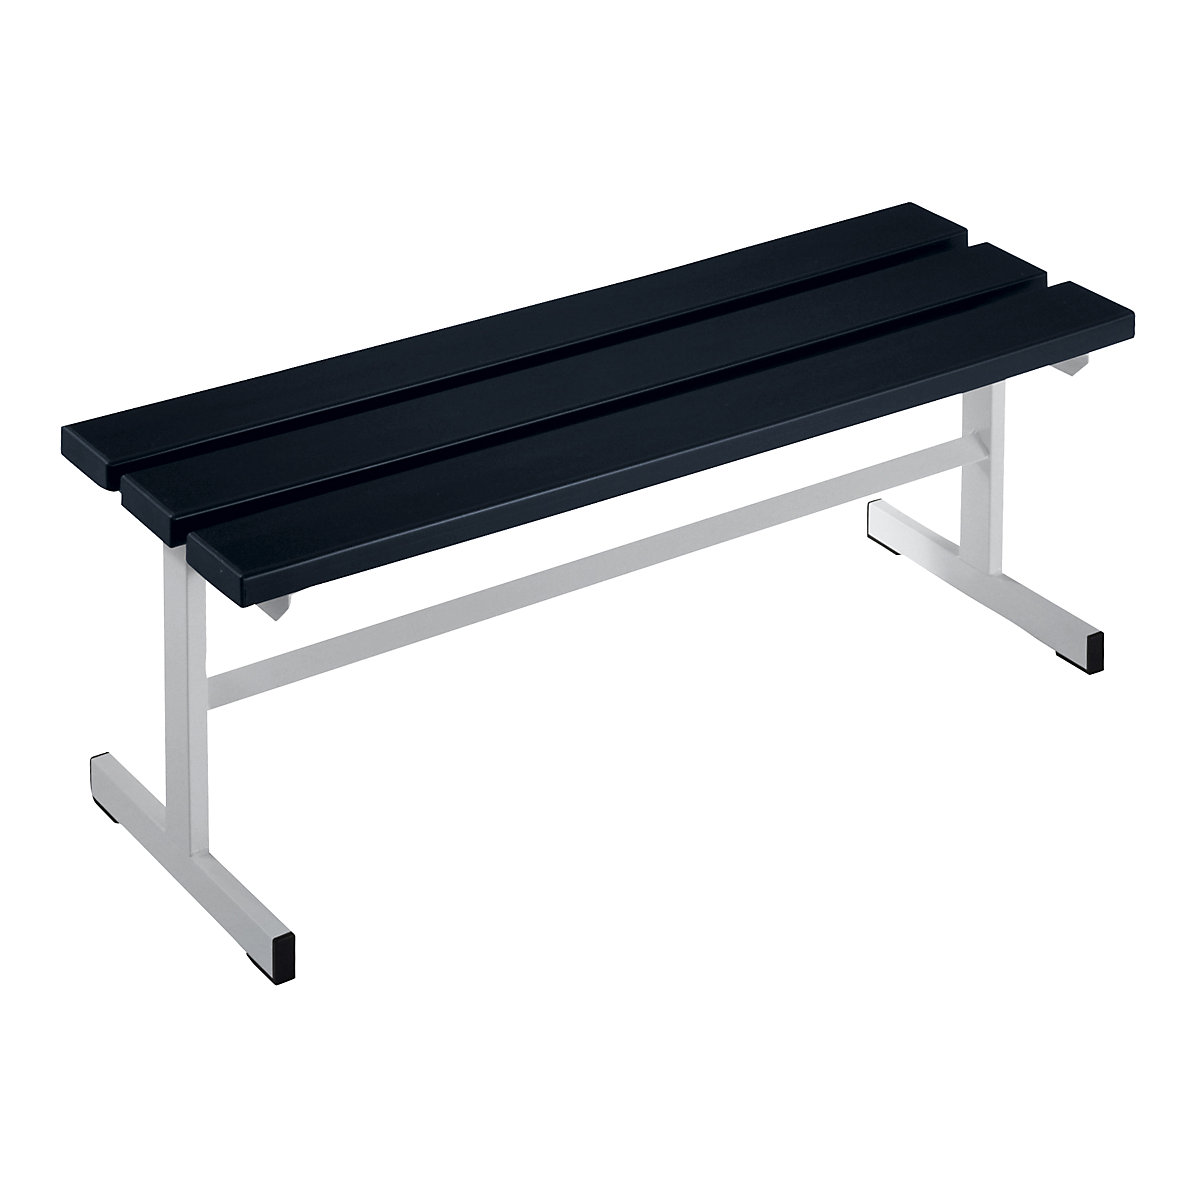 Wolf – Cloakroom bench, single sided seat, black, 1000 mm length